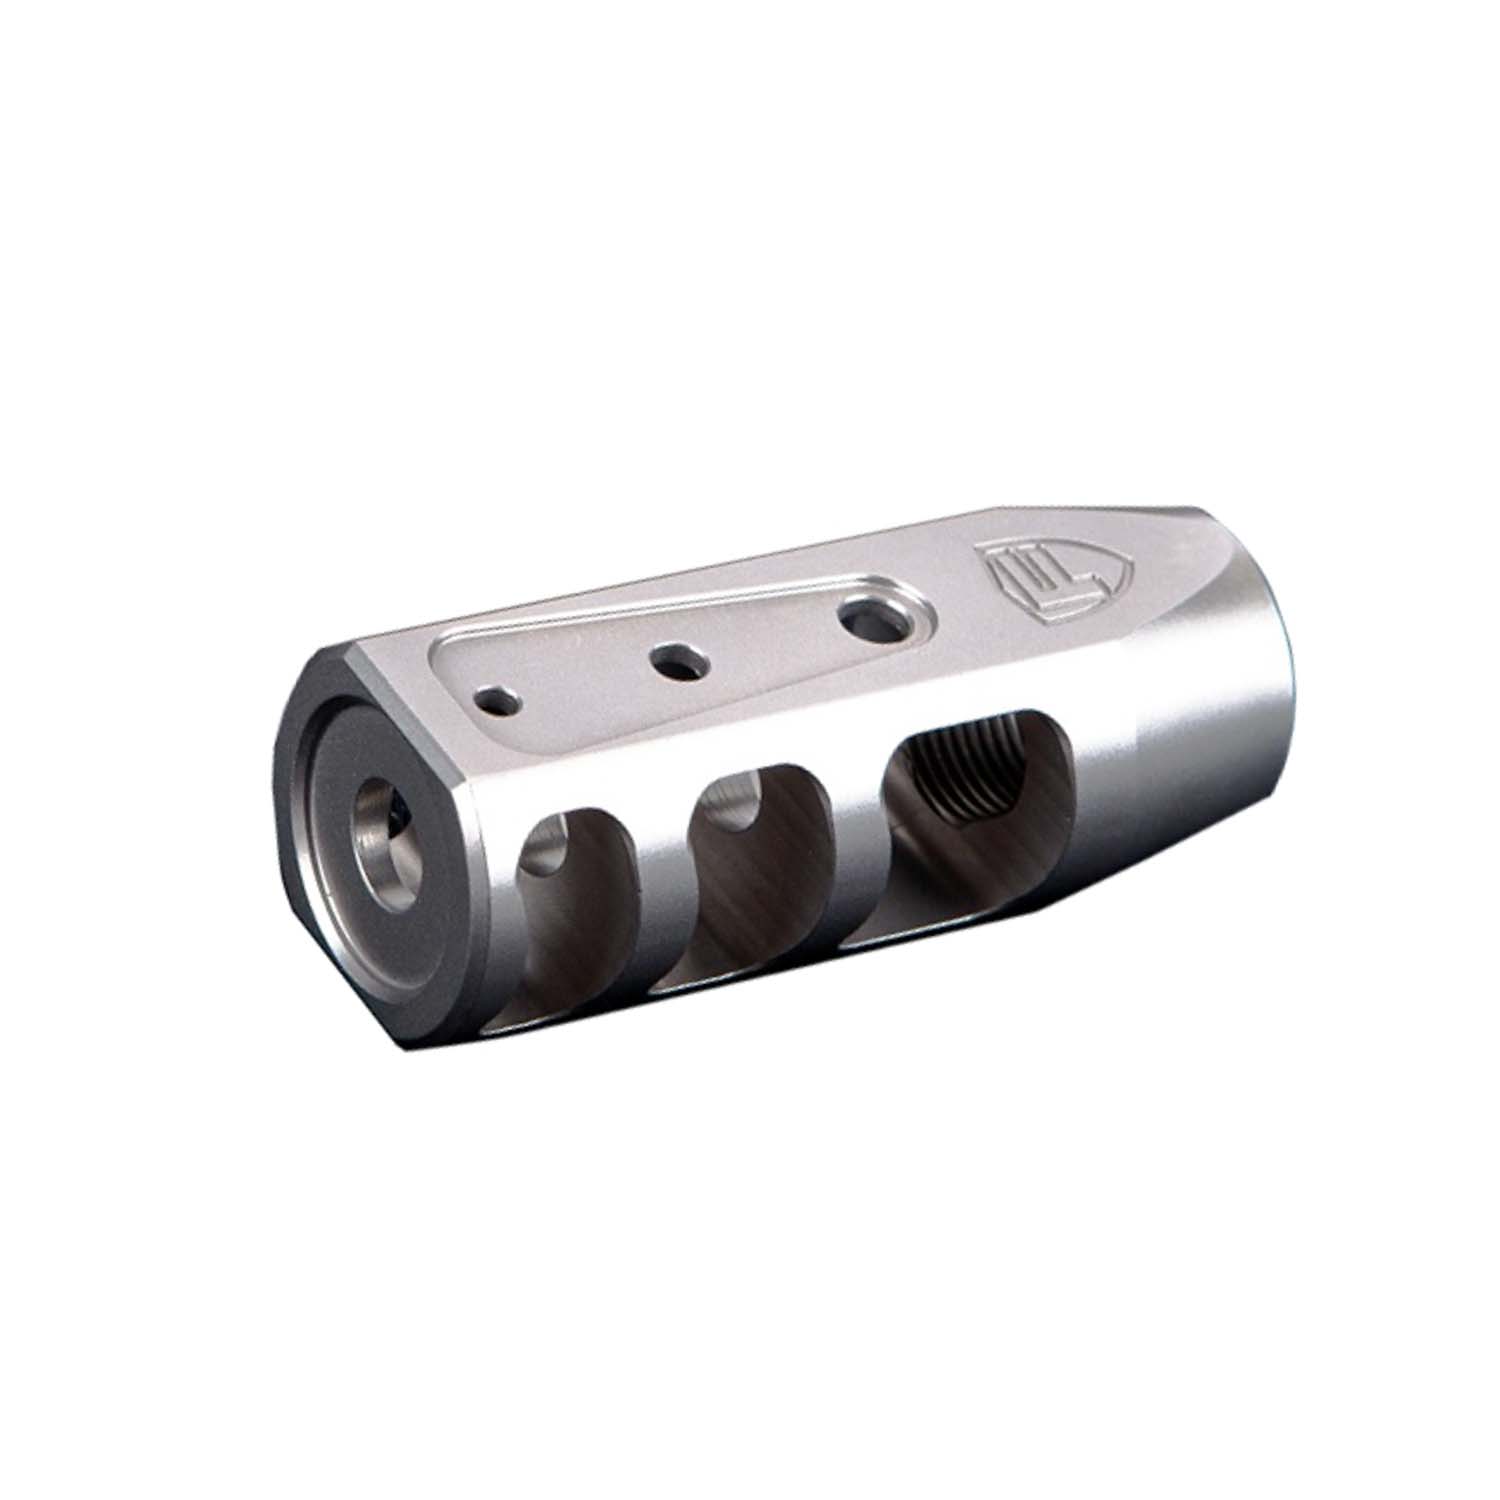 Fortis RED 556 Muzzle Brake, AR-15 Accessories